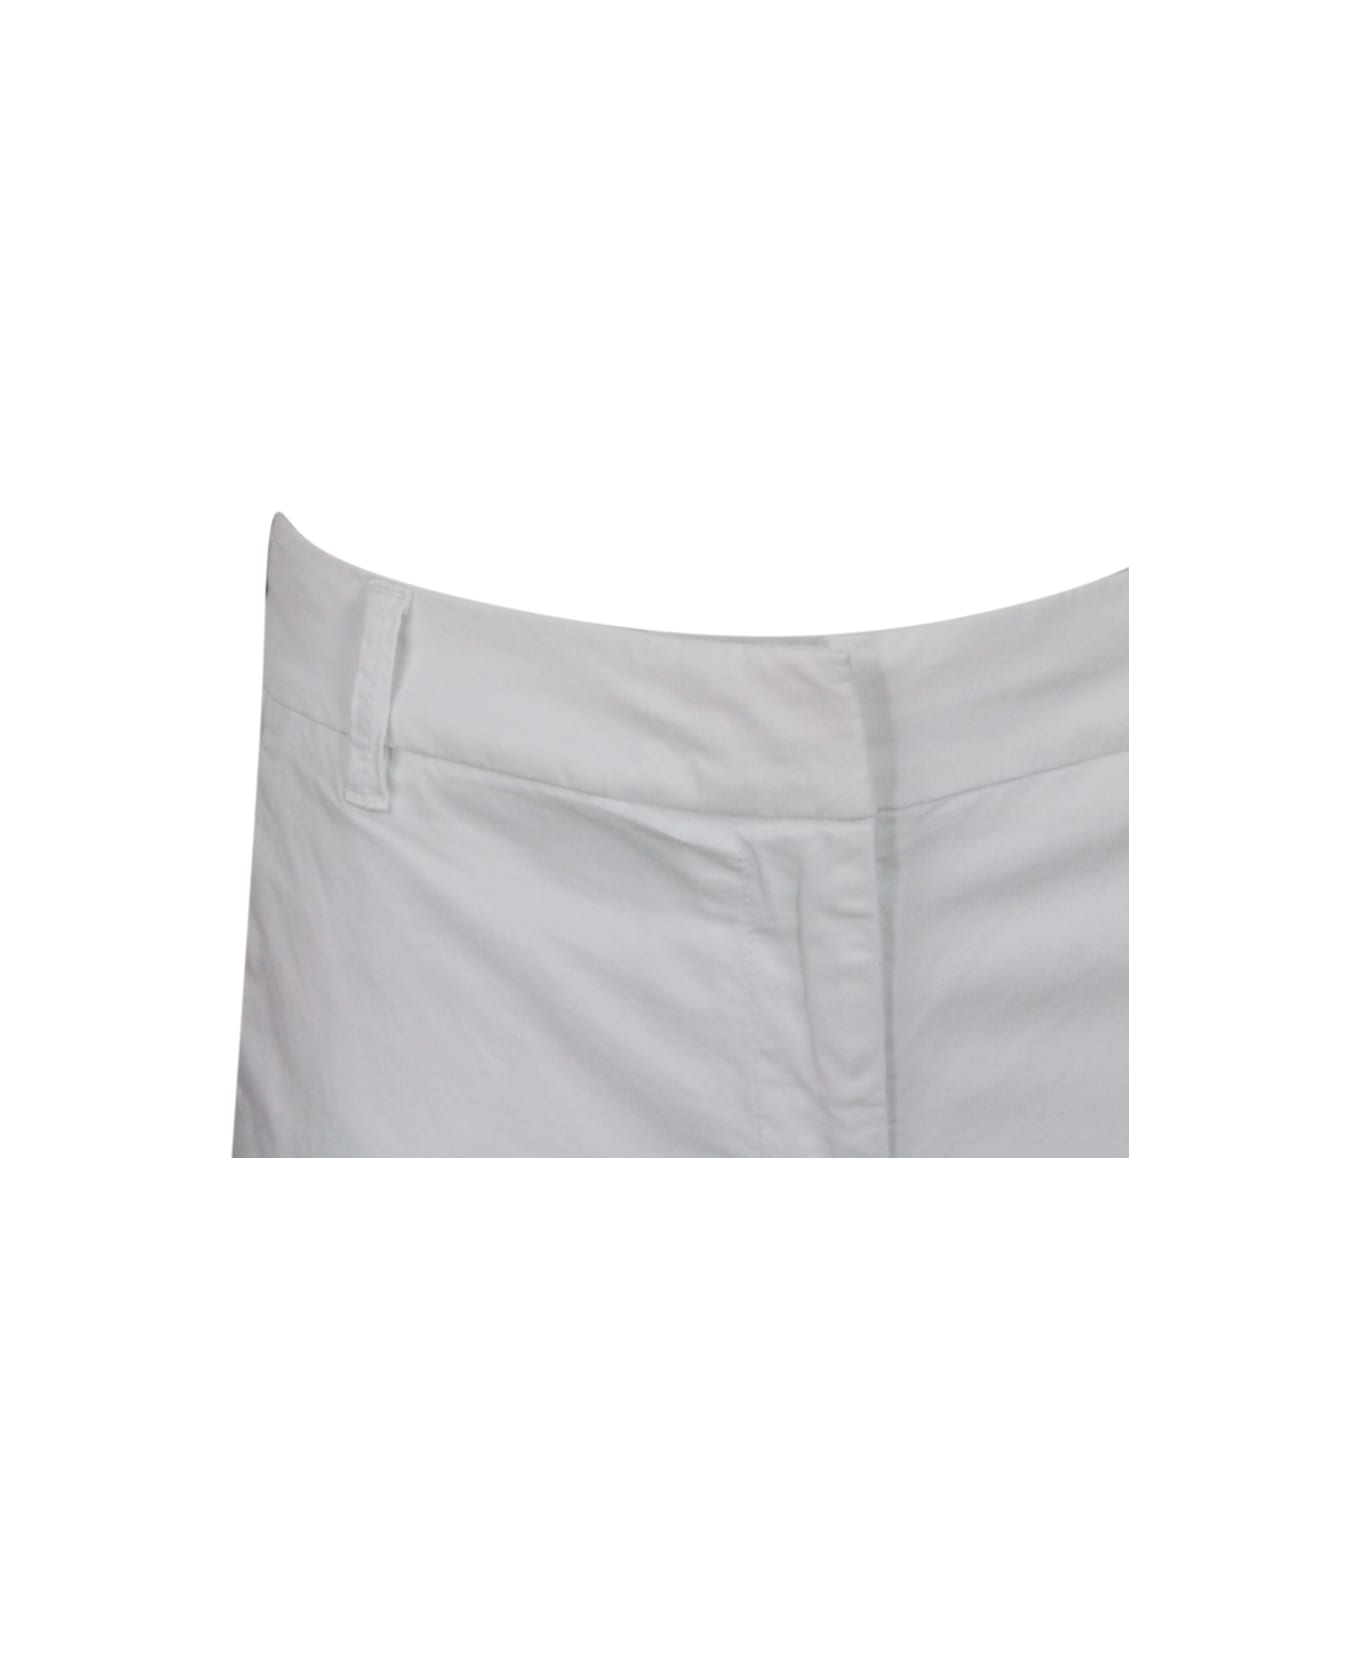 Jacob Cohen Luxury Edition Selena Cropped Trousers In Soft Stretch Cotton With Chinos America Pockets With Zip Closure And Small Logo Above The Back Pocket - White